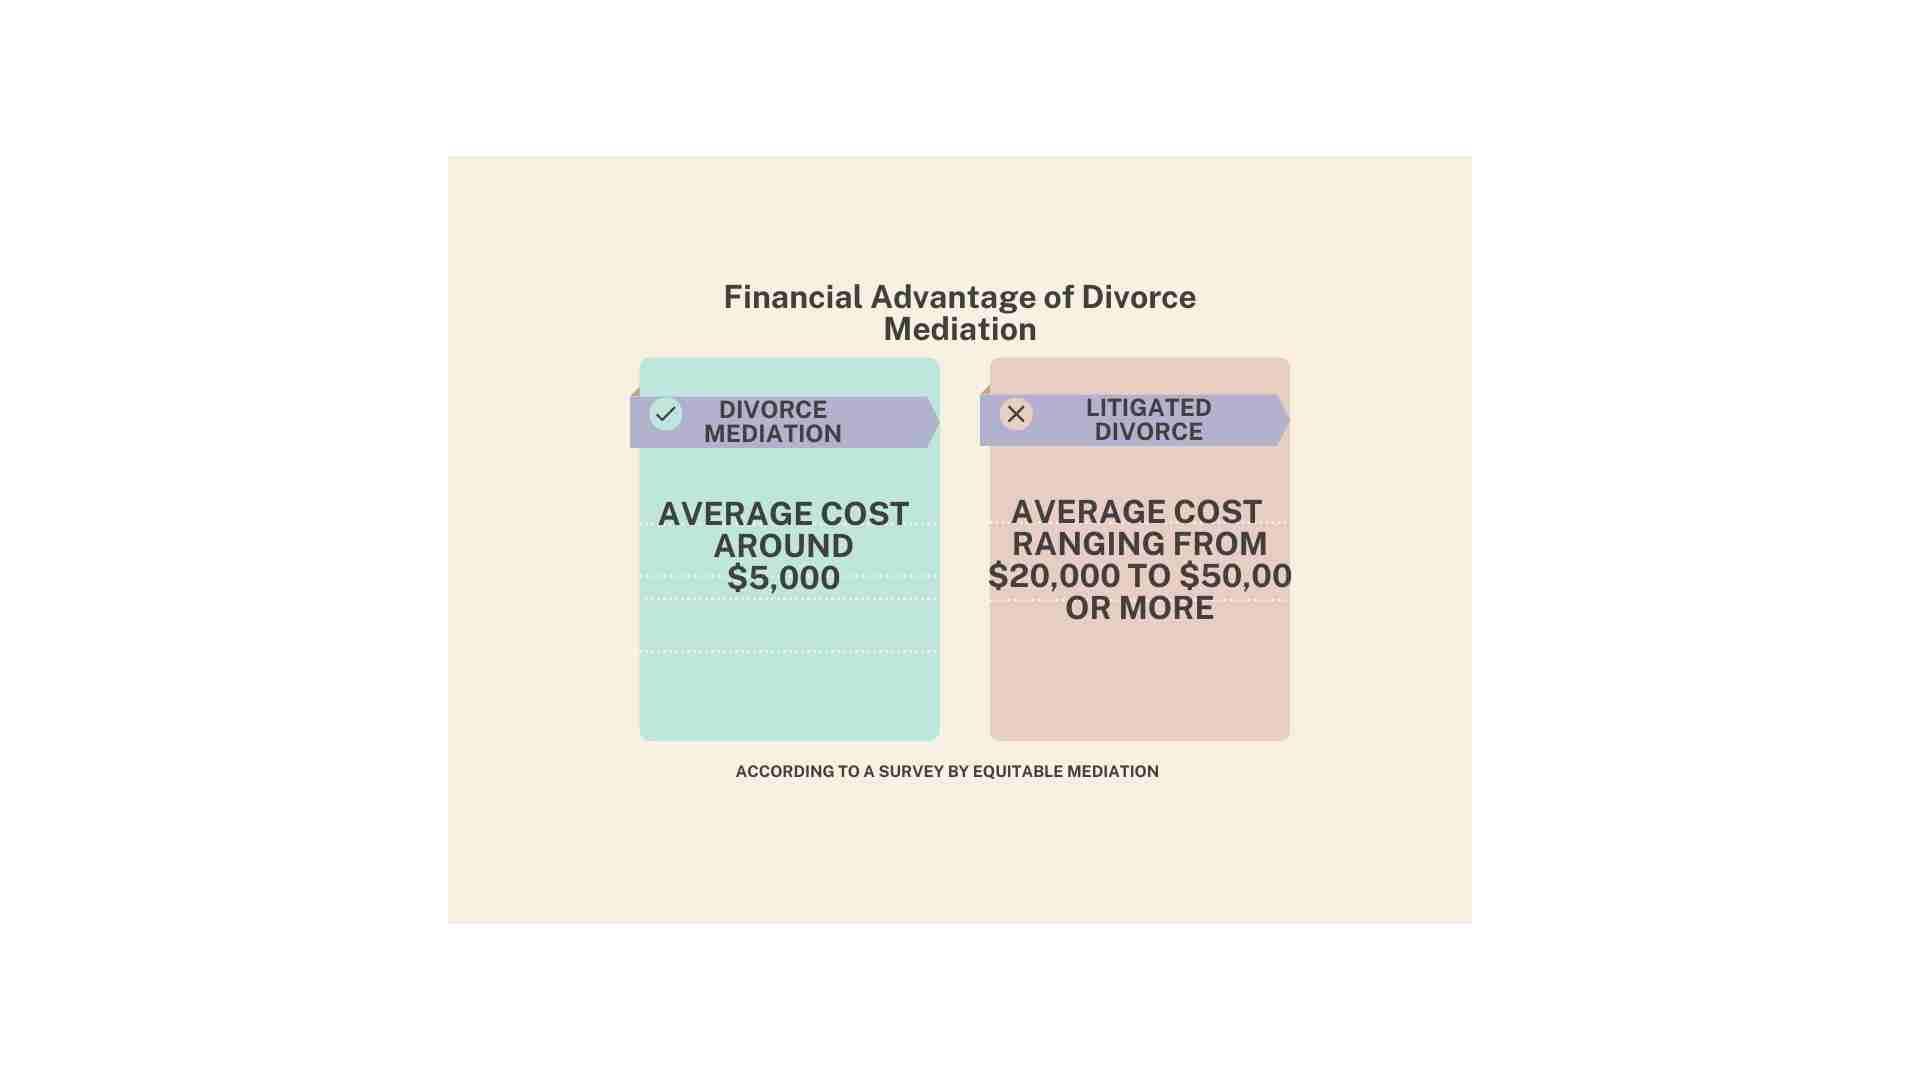 Comparison chart showing average costs: Divorce Mediation, a more peaceful path, costs around $5,000; Litigated Divorce ranges from $20,000 to $50,000 or more. Based on a survey by Equitable Mediation.